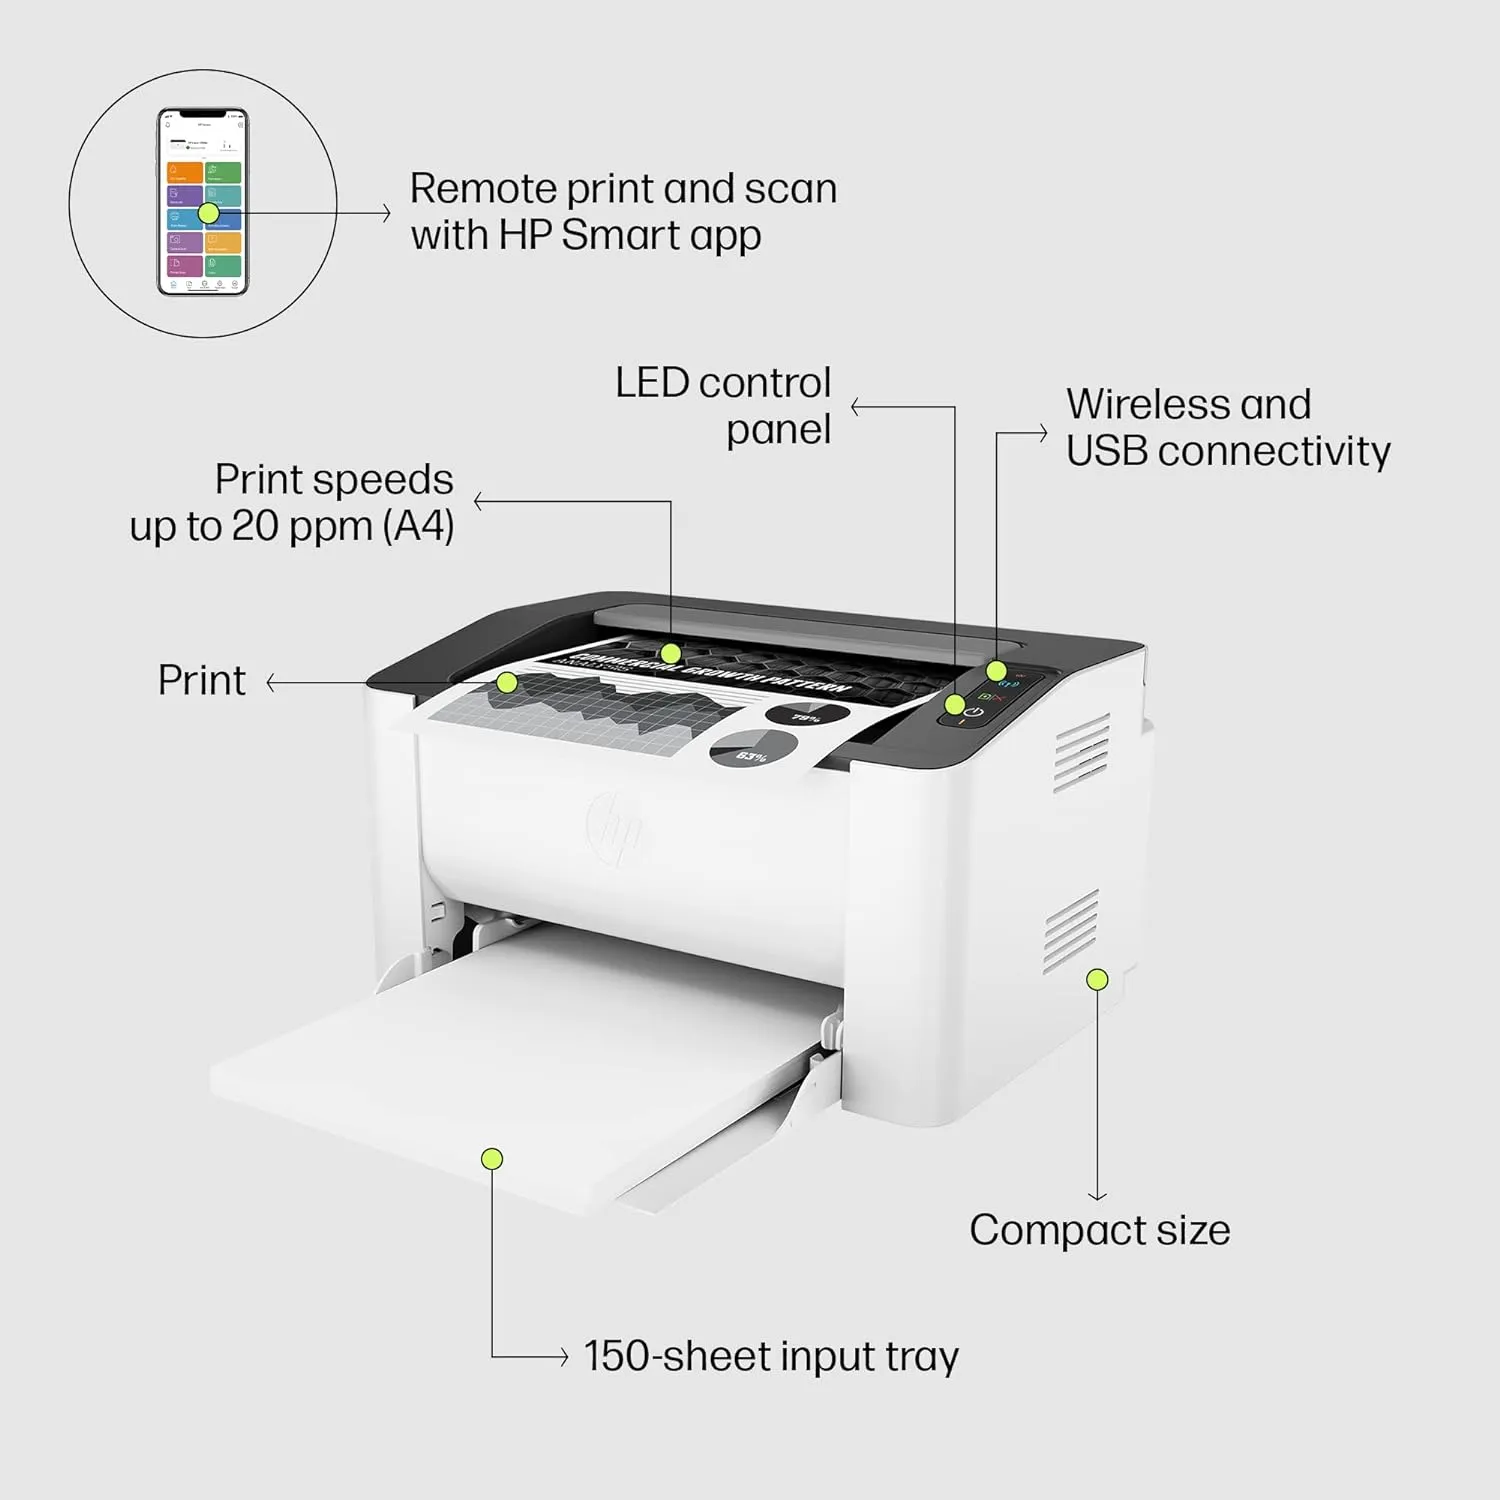 HP Laser 1008w Wi-Fi Printer, Designed For Home & Office Use, Single Function Wireless Monochrome Fast Printing, White